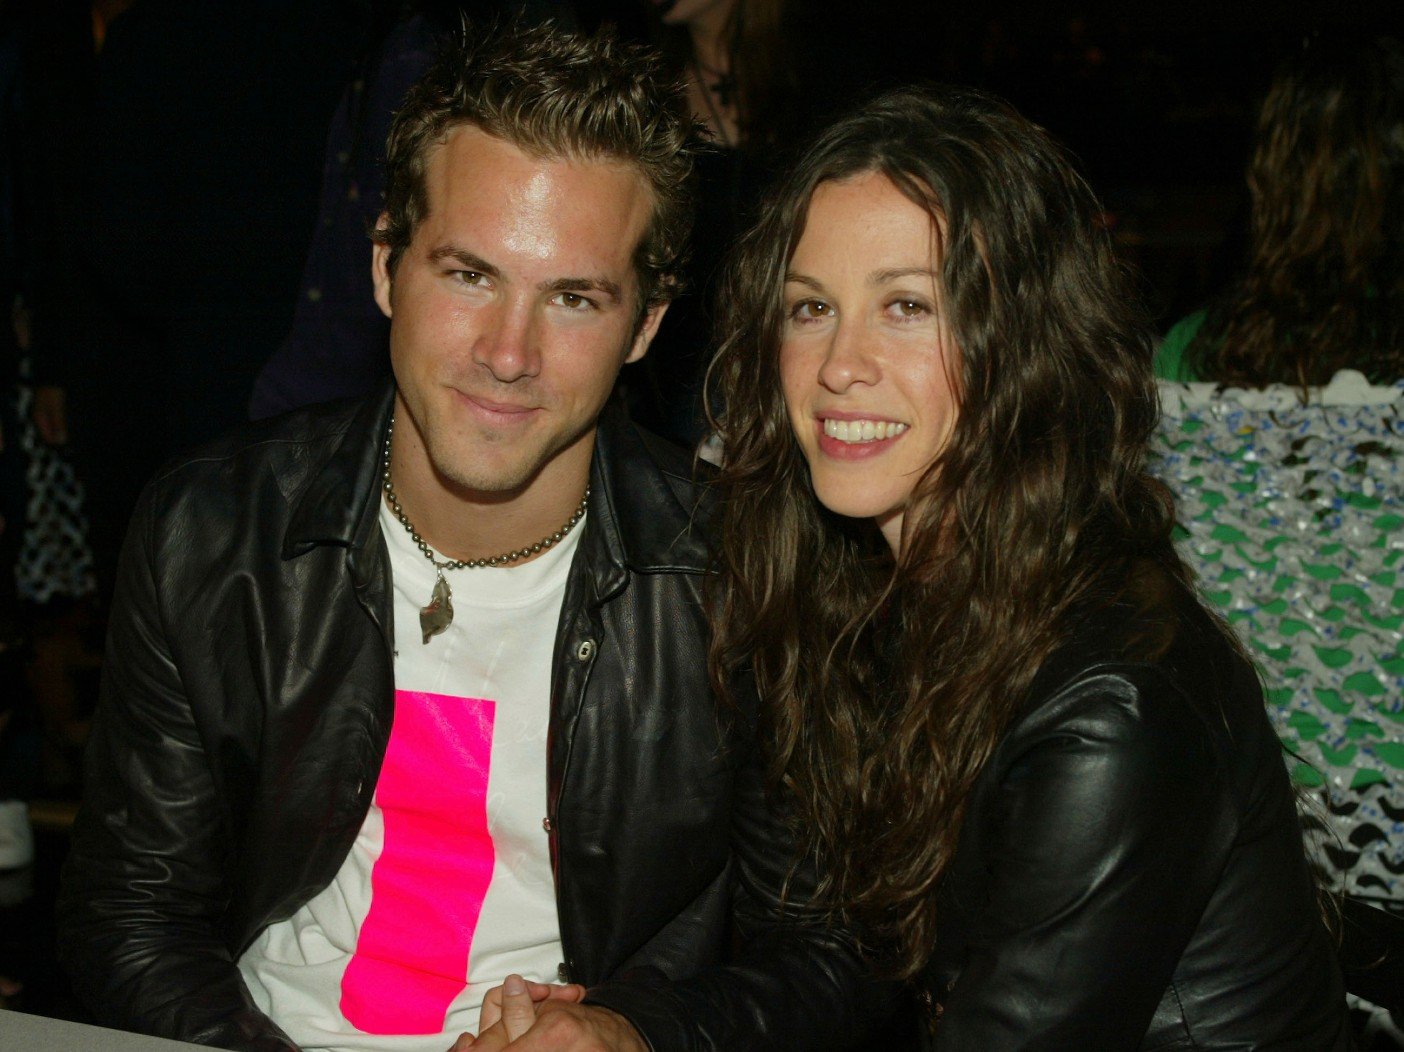 The True Story of Ryan Reynolds’ and Alanis Morissette’s Relationship